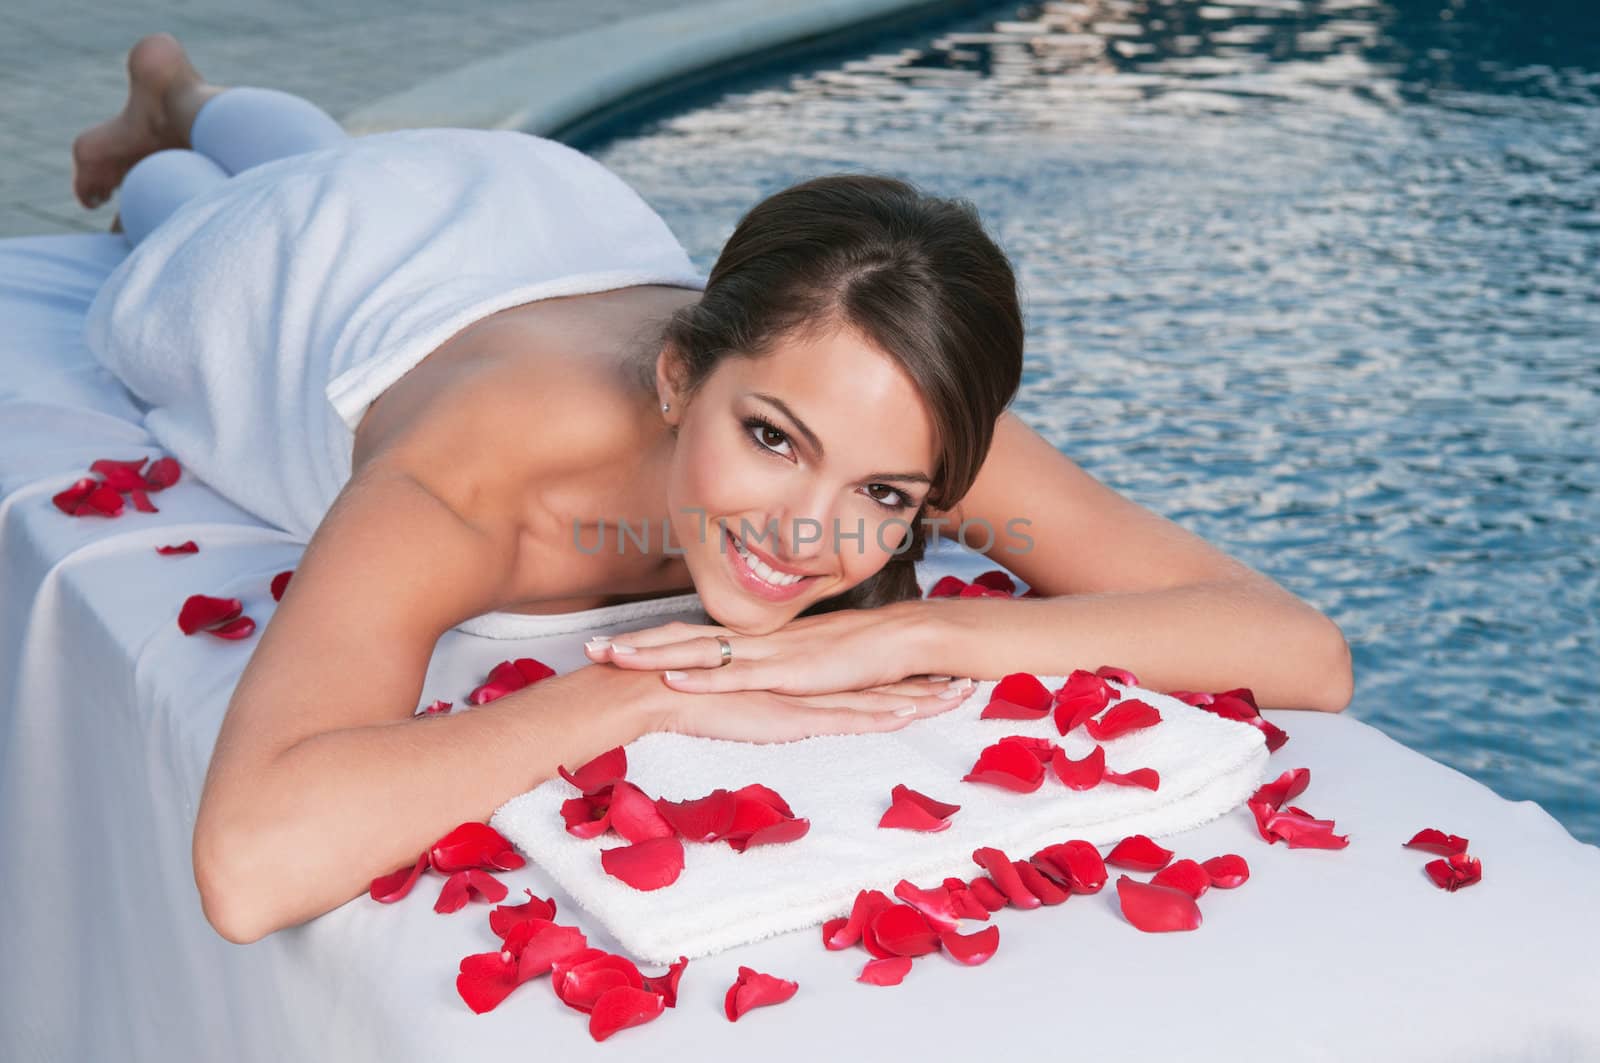 Smiling young woman at spa with rose petals around by leaf